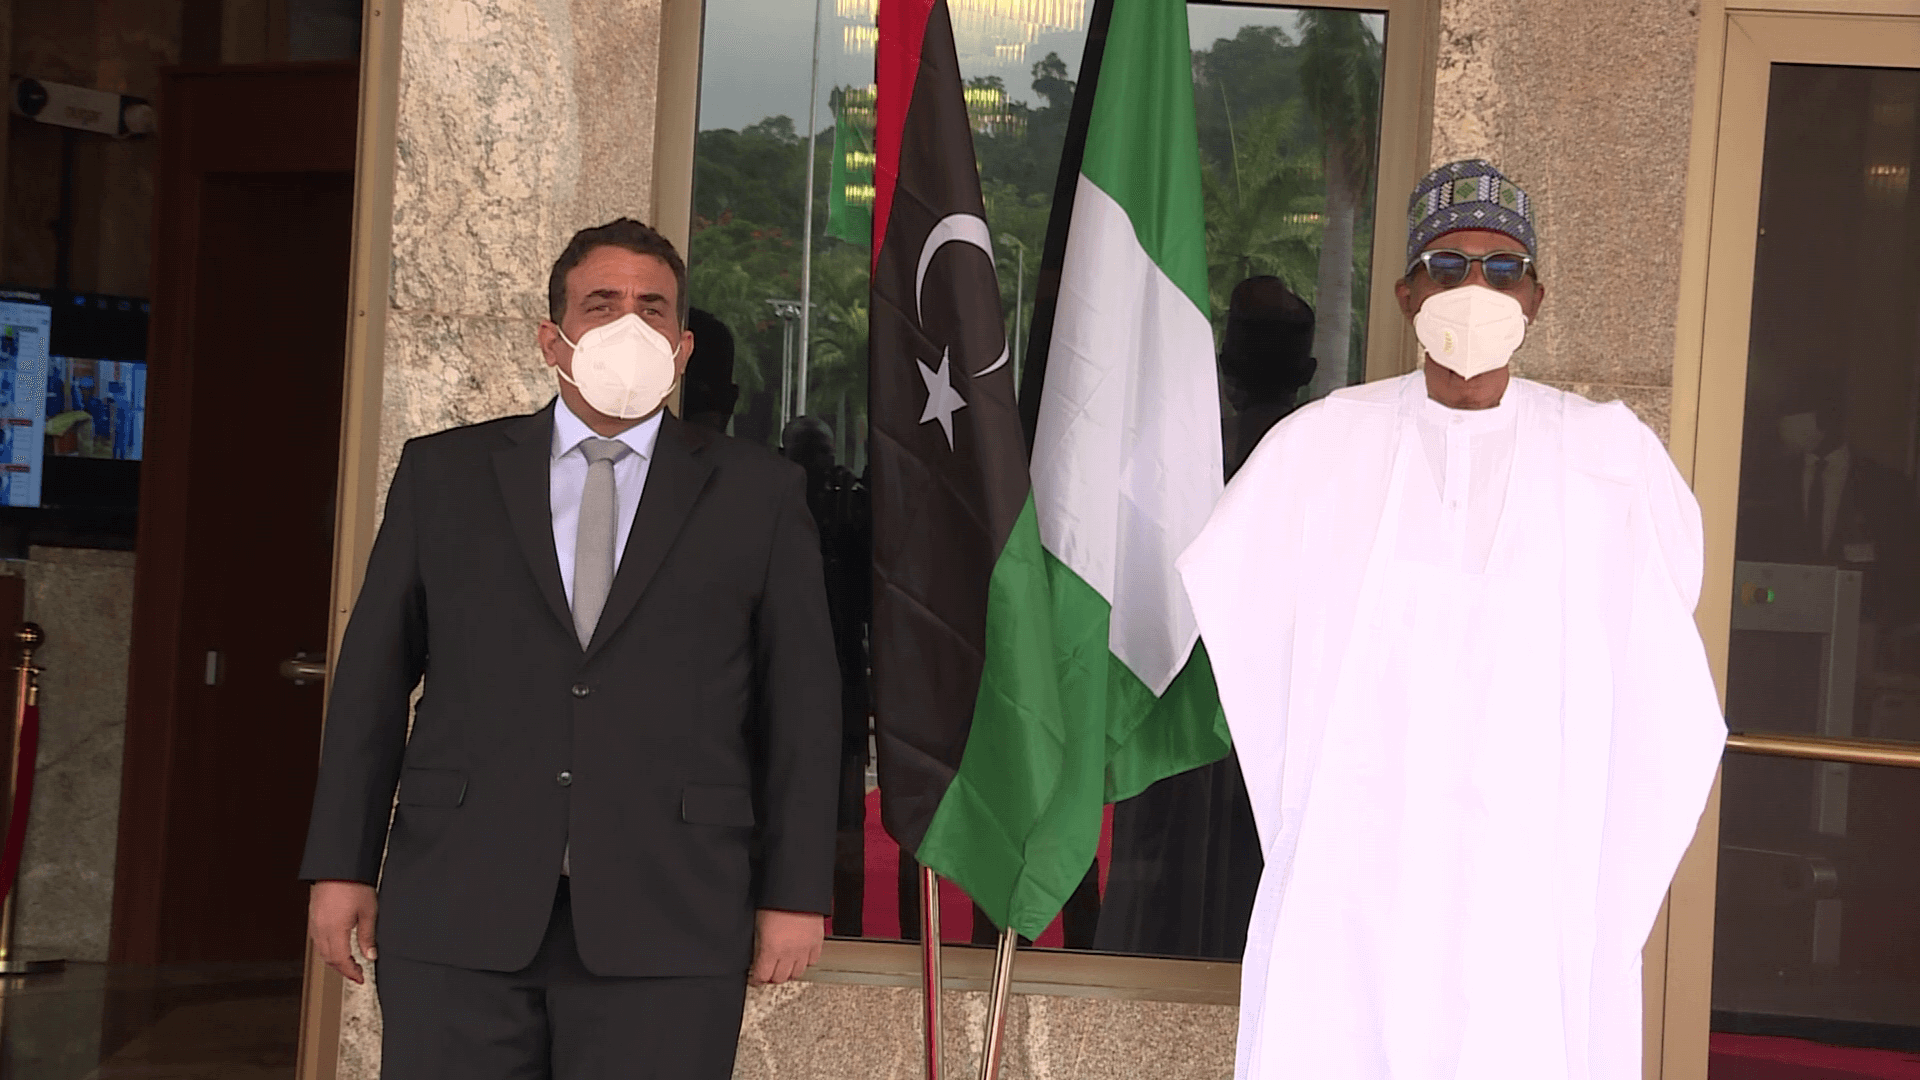 Why Stability of Libya Matters to Us - President Buhari